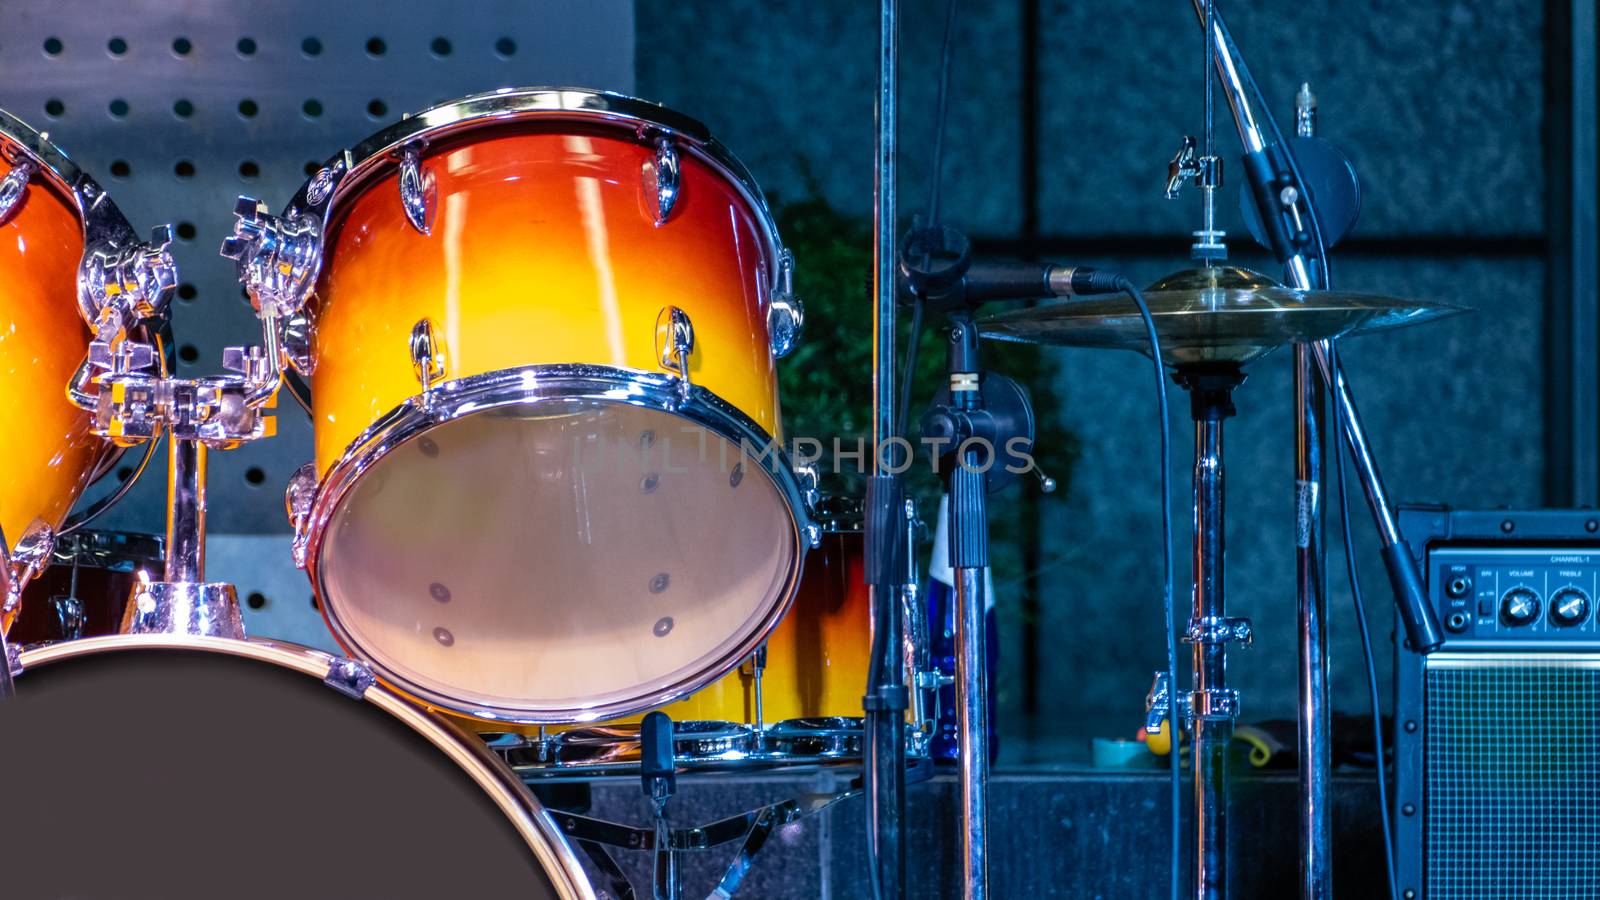 Close-up of drums on stage